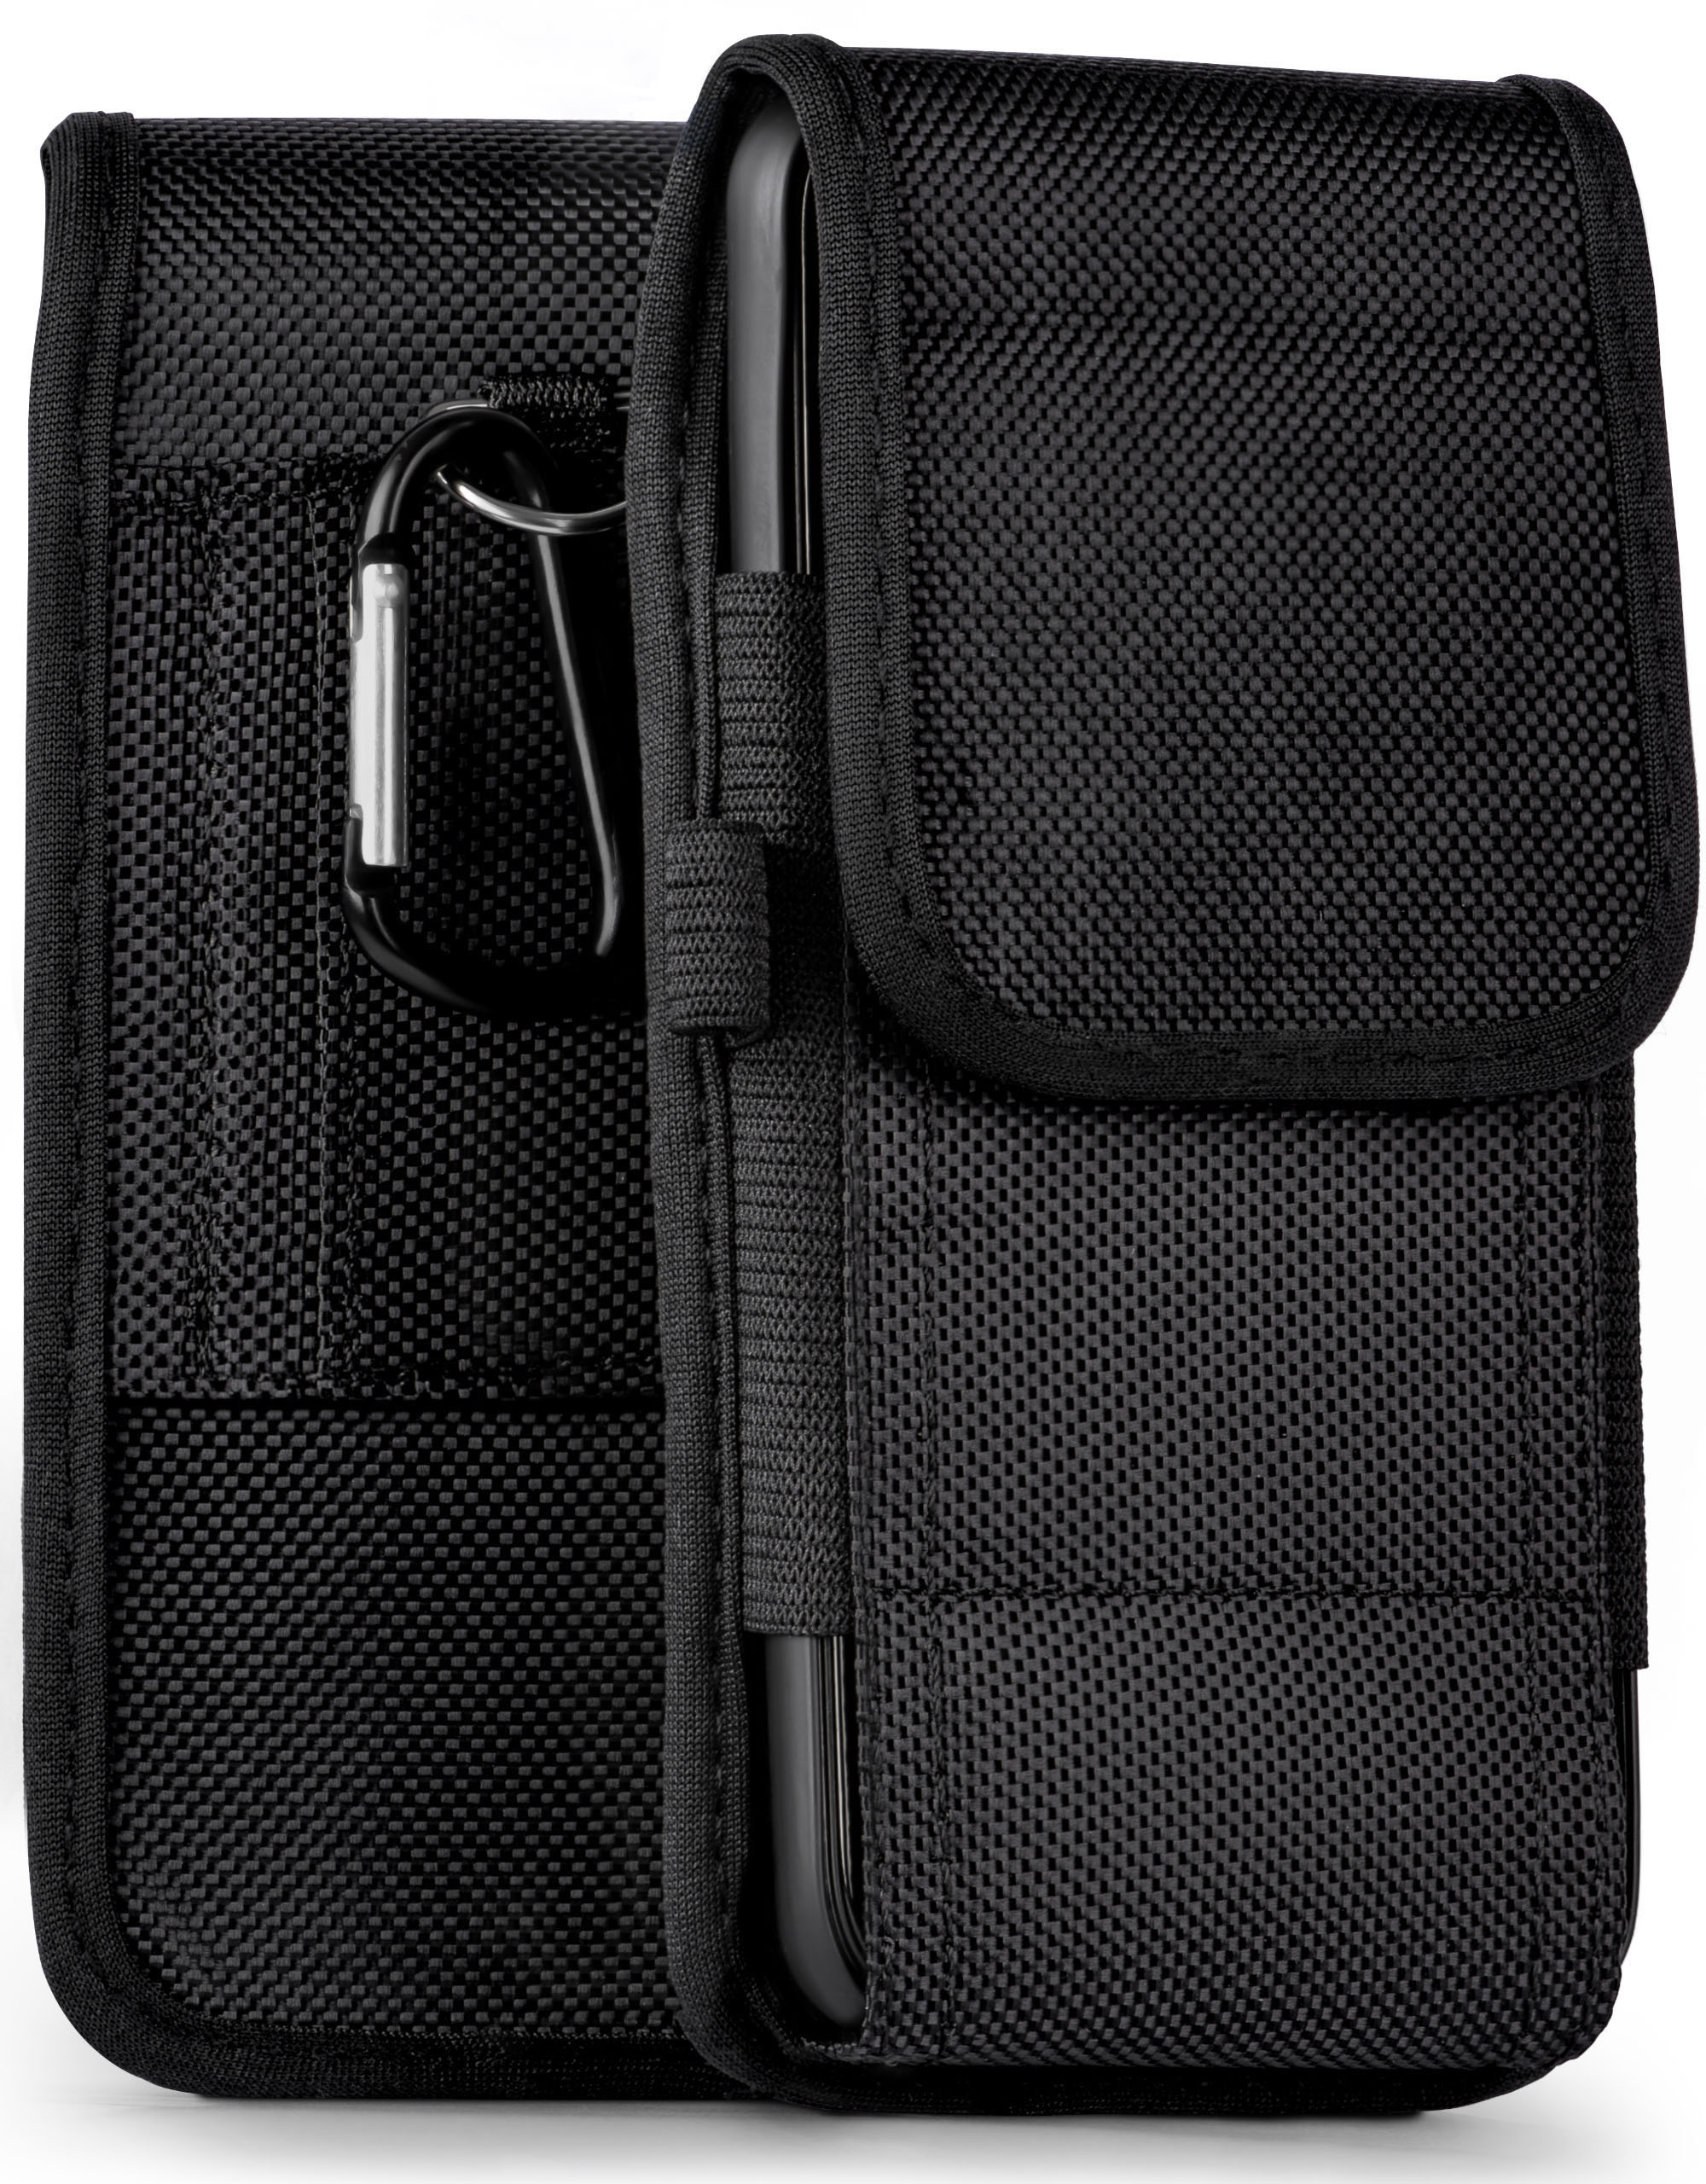 Case, Holster, Plus, Trail 1 Agility MOEX Nokia,